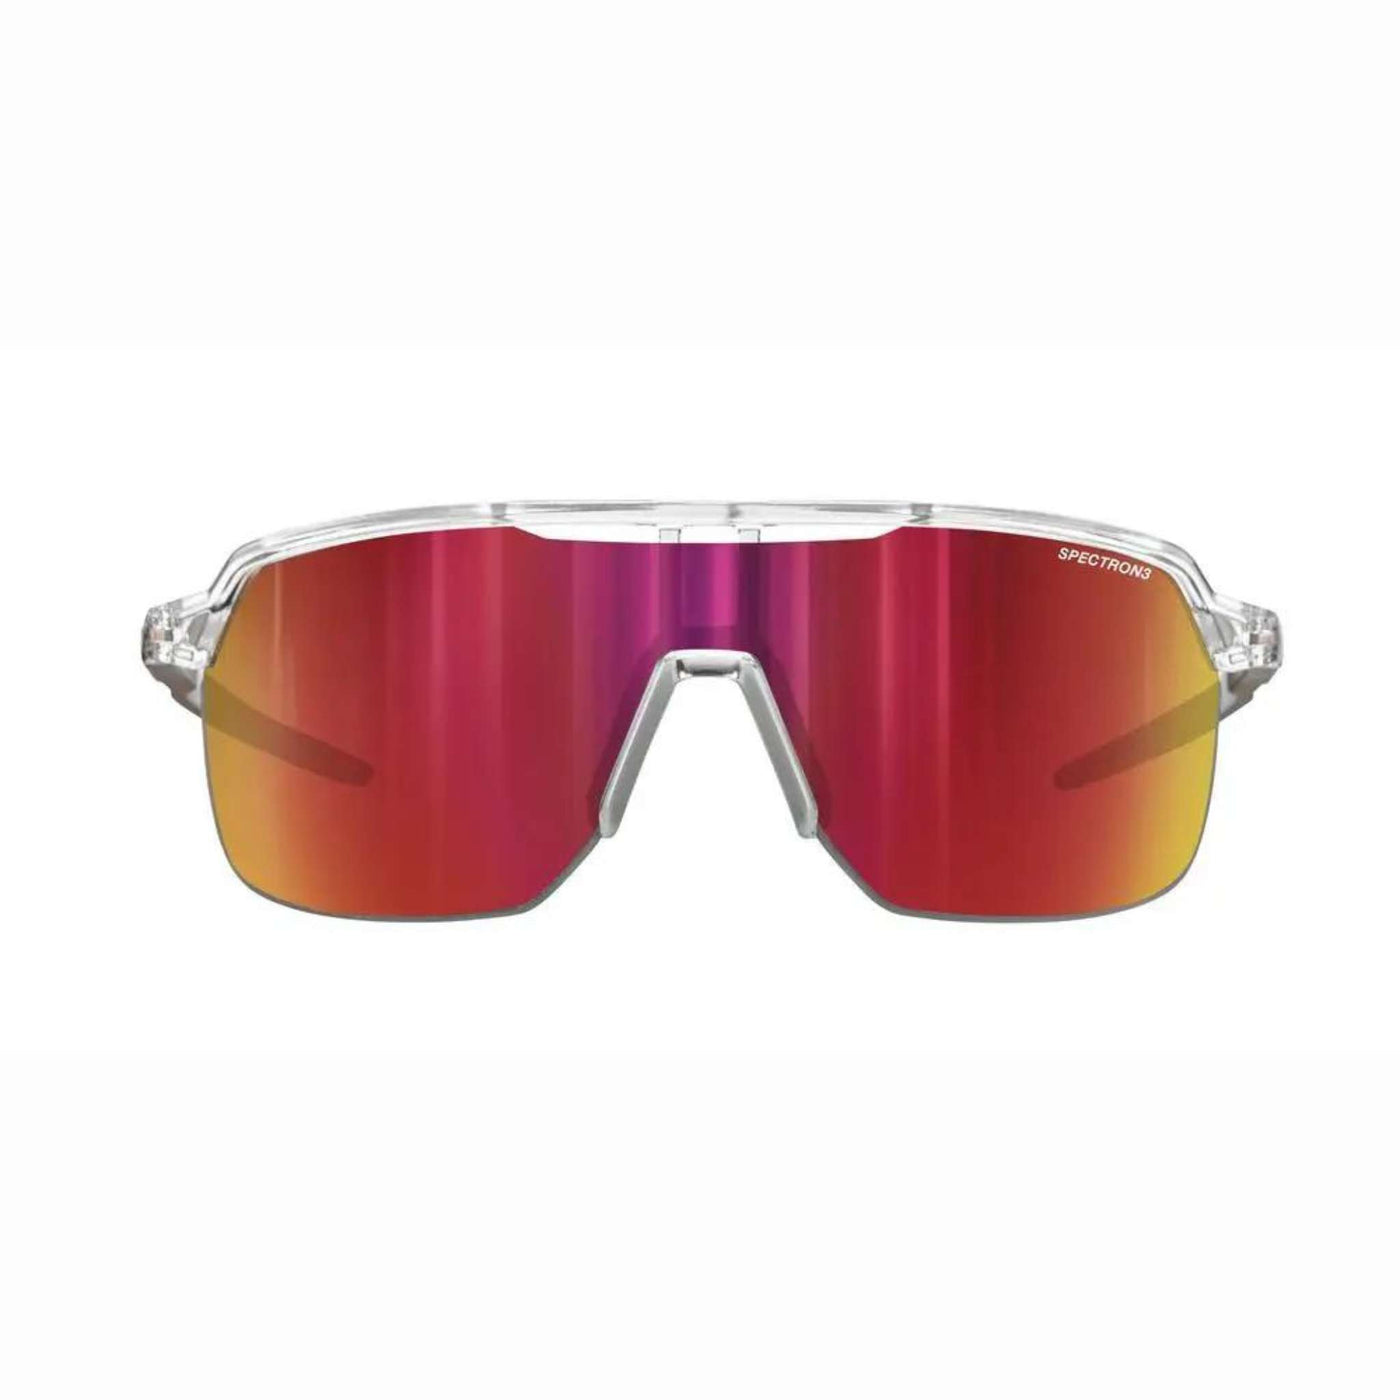 Julbo Frequency Cristal/Red Sunglasses - Spectron 3CF Lens | Performance Sunglasses | Further Faster Christchurch NZ